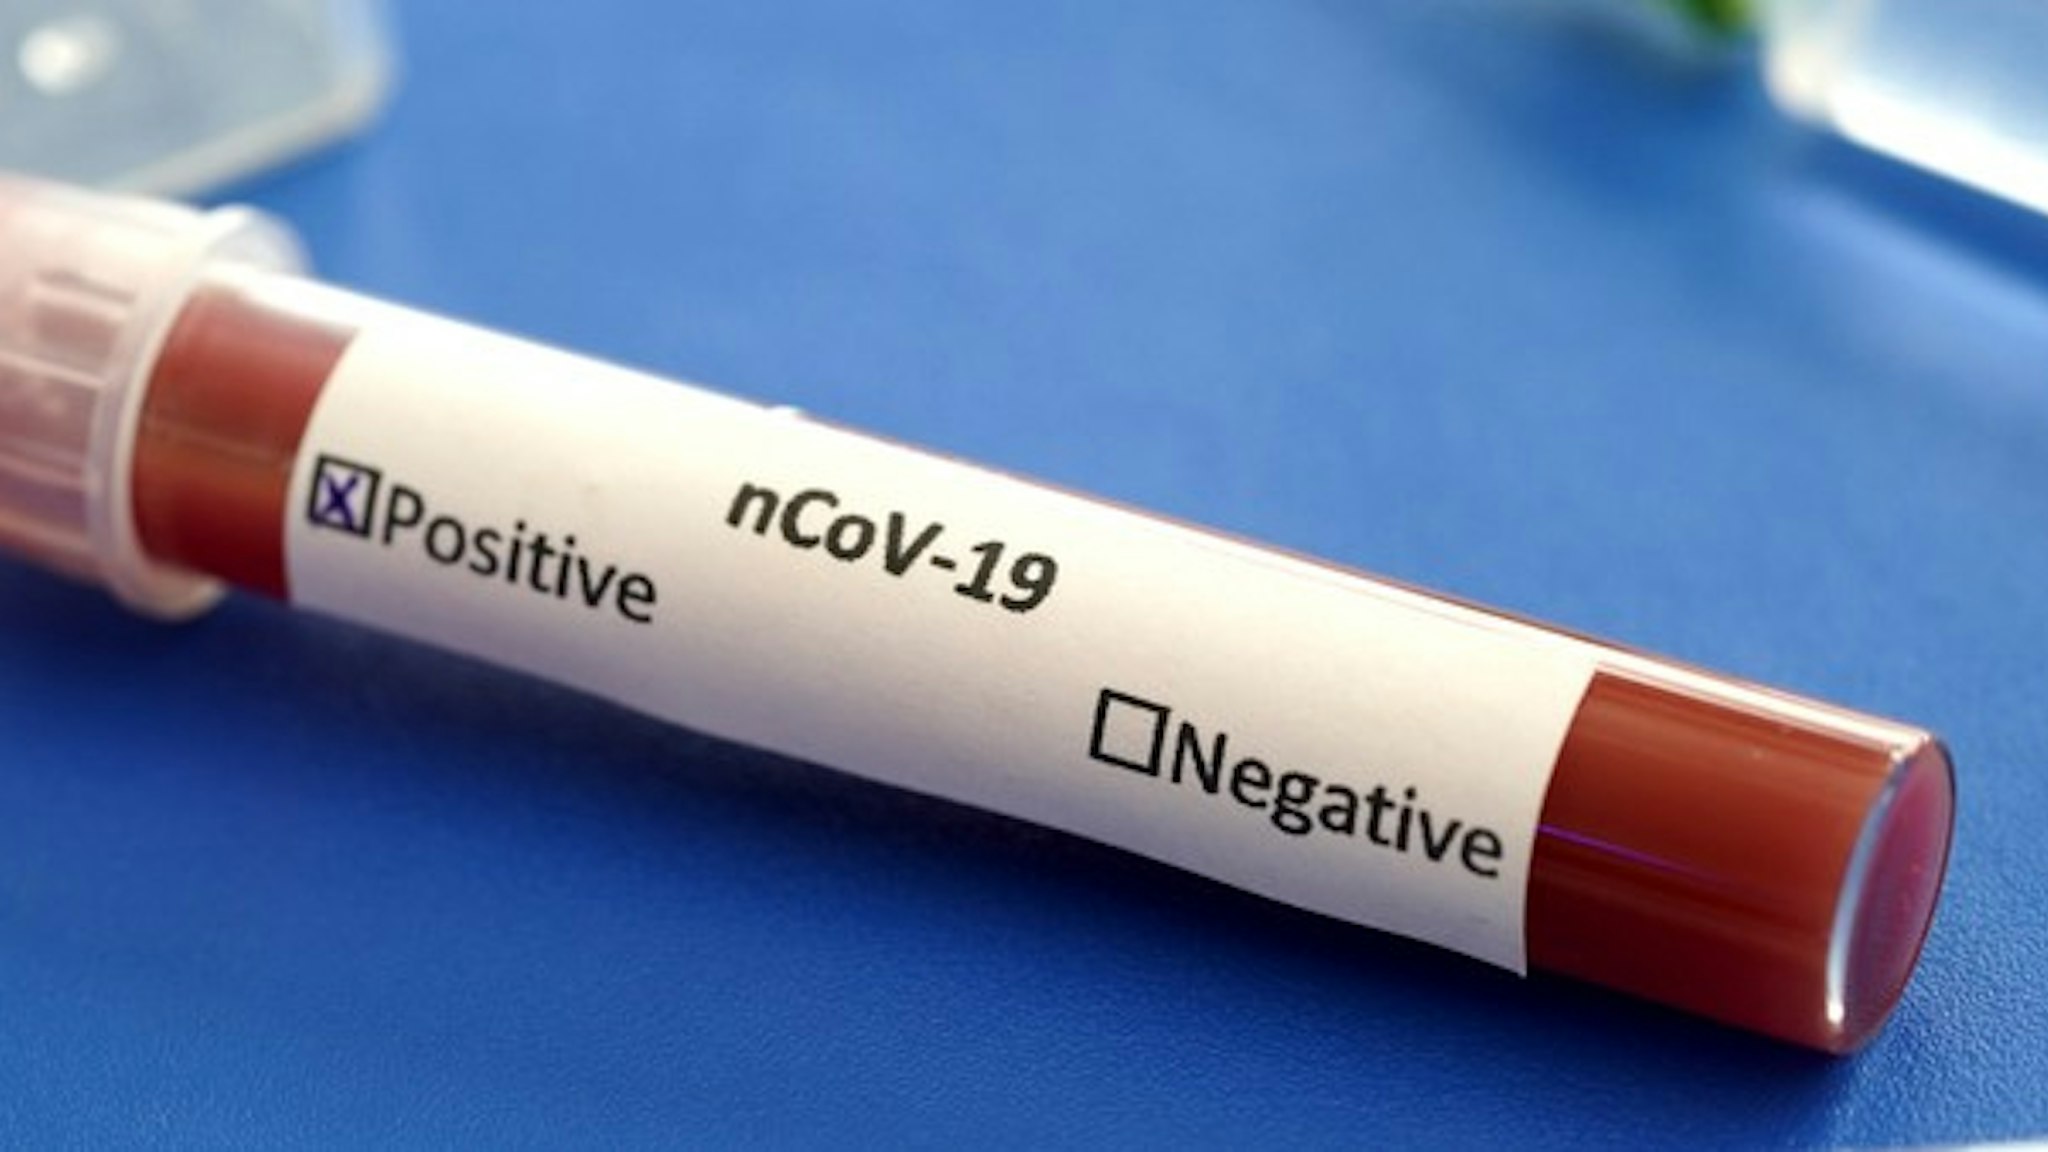 COVID19 test and laboratory sample of blood testing for diagnosis new Corona virus infection